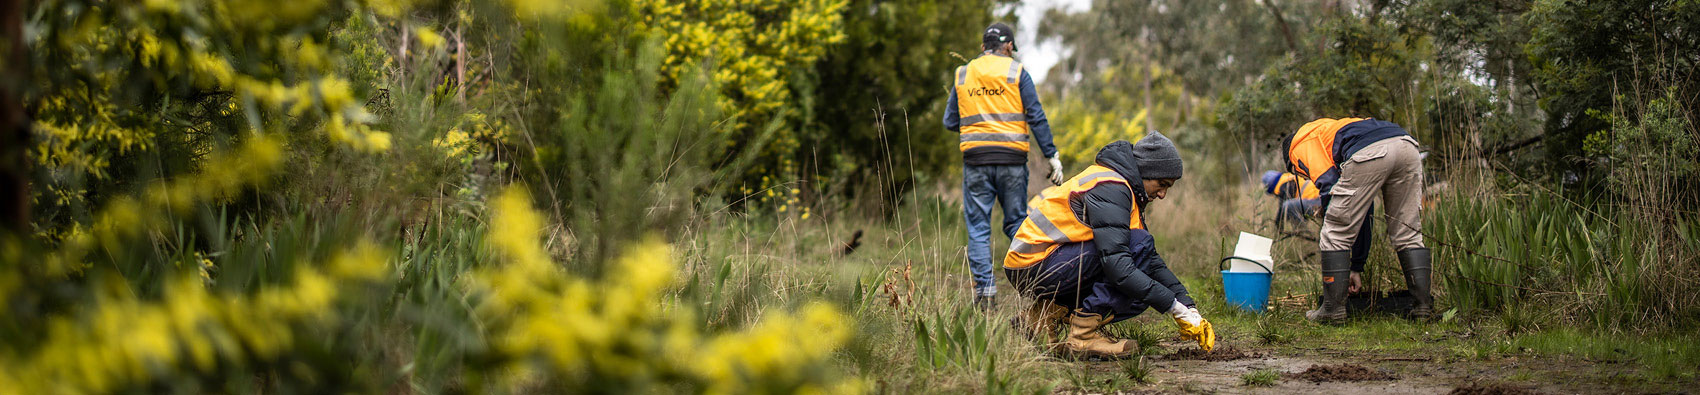 Three people weating hi vis vests and working in an outdoors bush area and bent over working in the dirt. In the foreground are yellow and green bushes. 